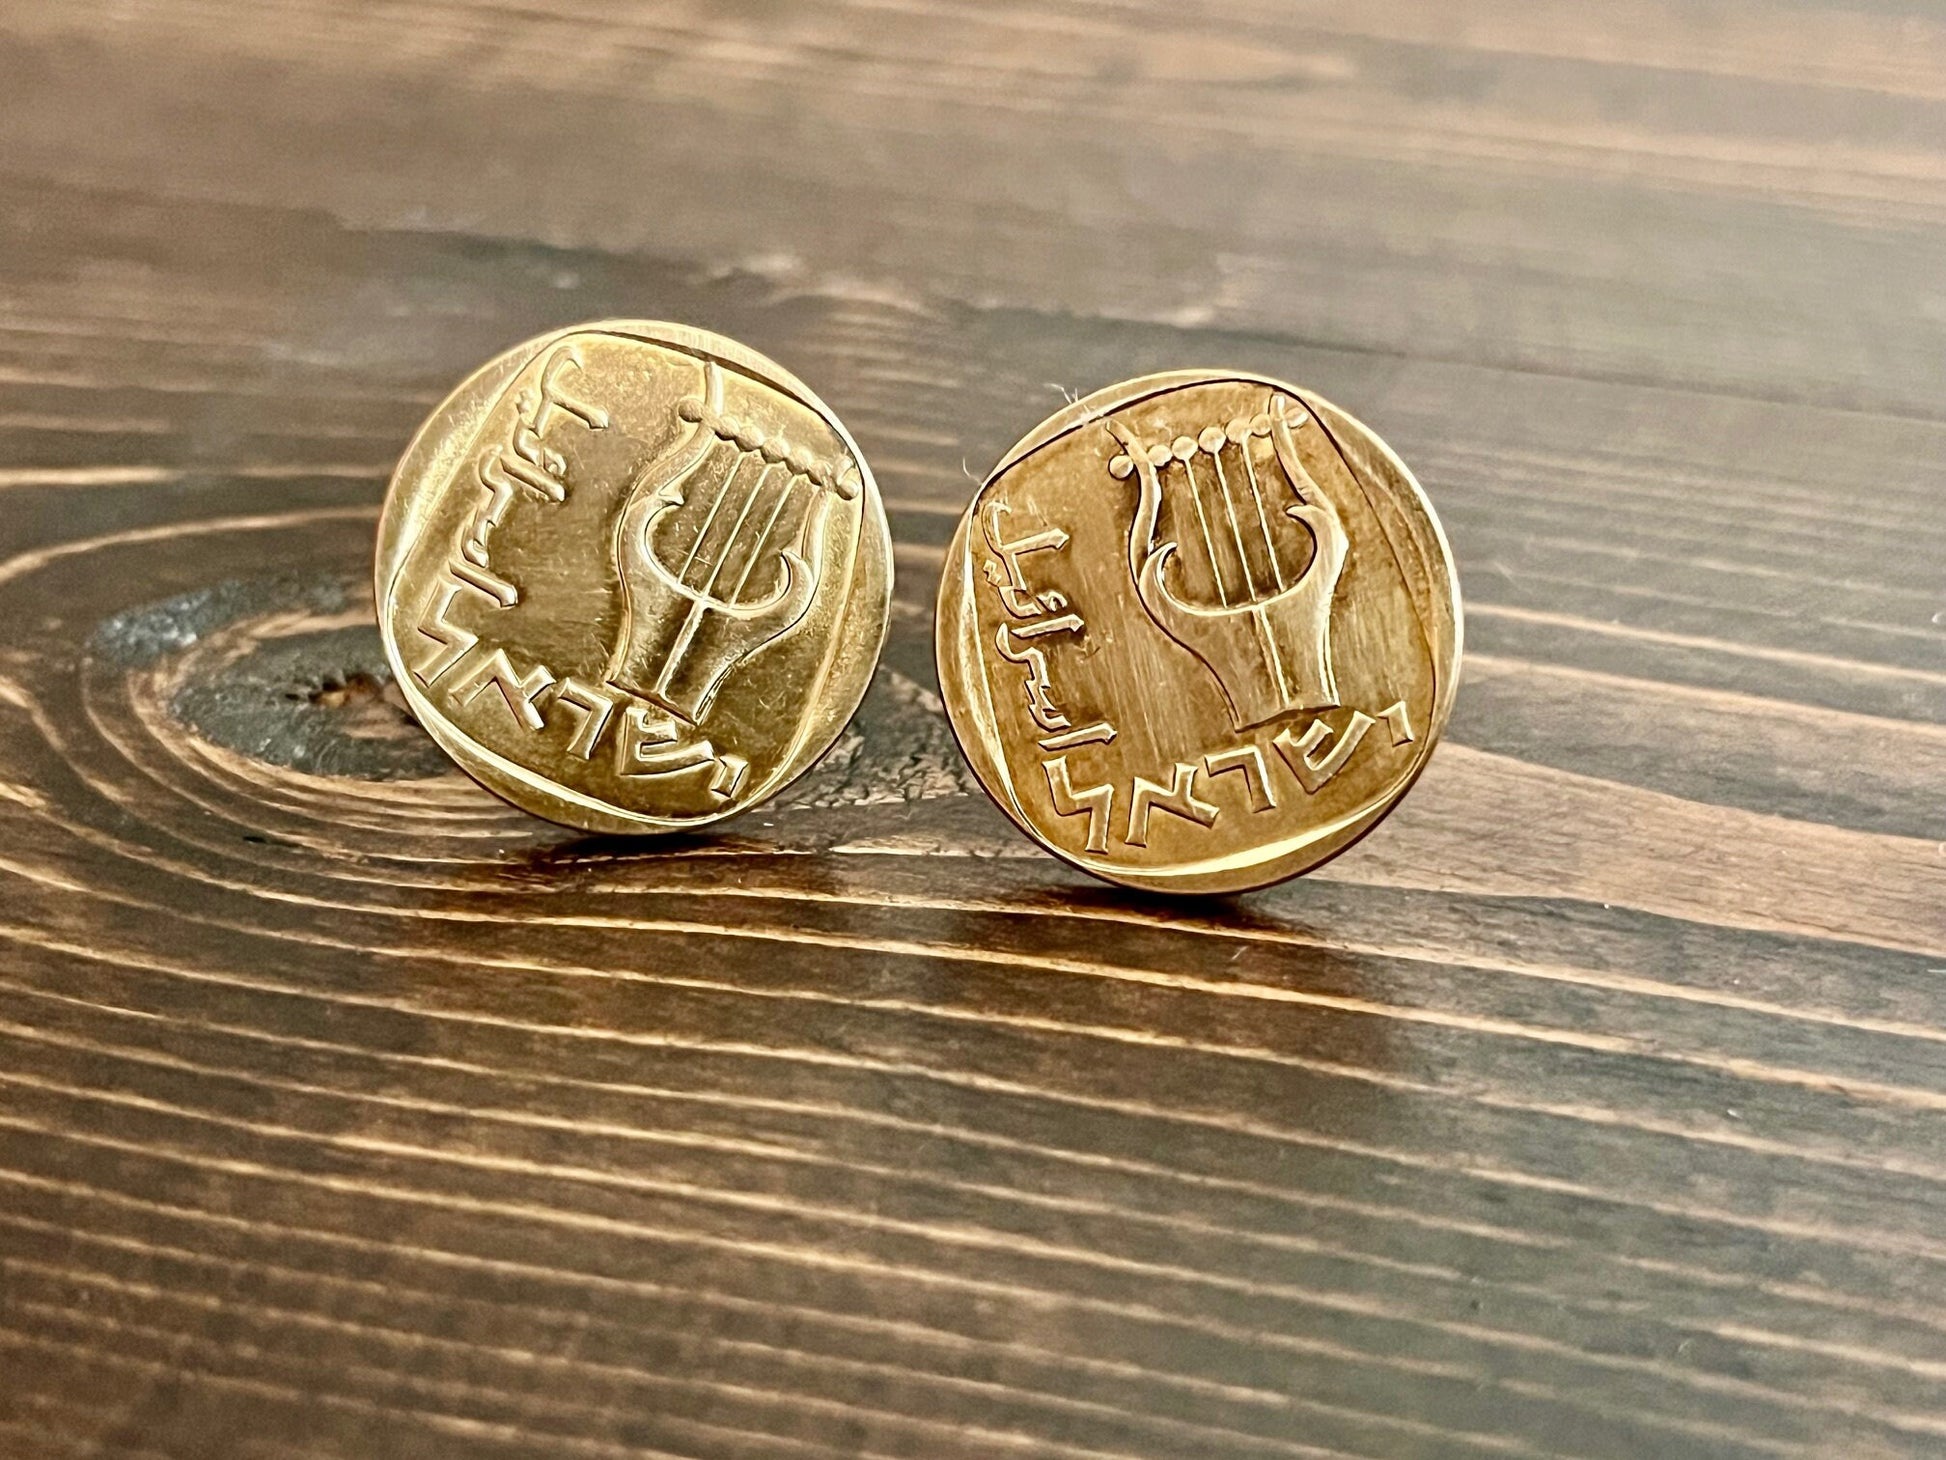 Israel Coin Cuff Links Israeli Custom Made Vintage and Rare coins - Personal Touch One-of-Kind Coin Enthusiast - Suit and Tie Accessory